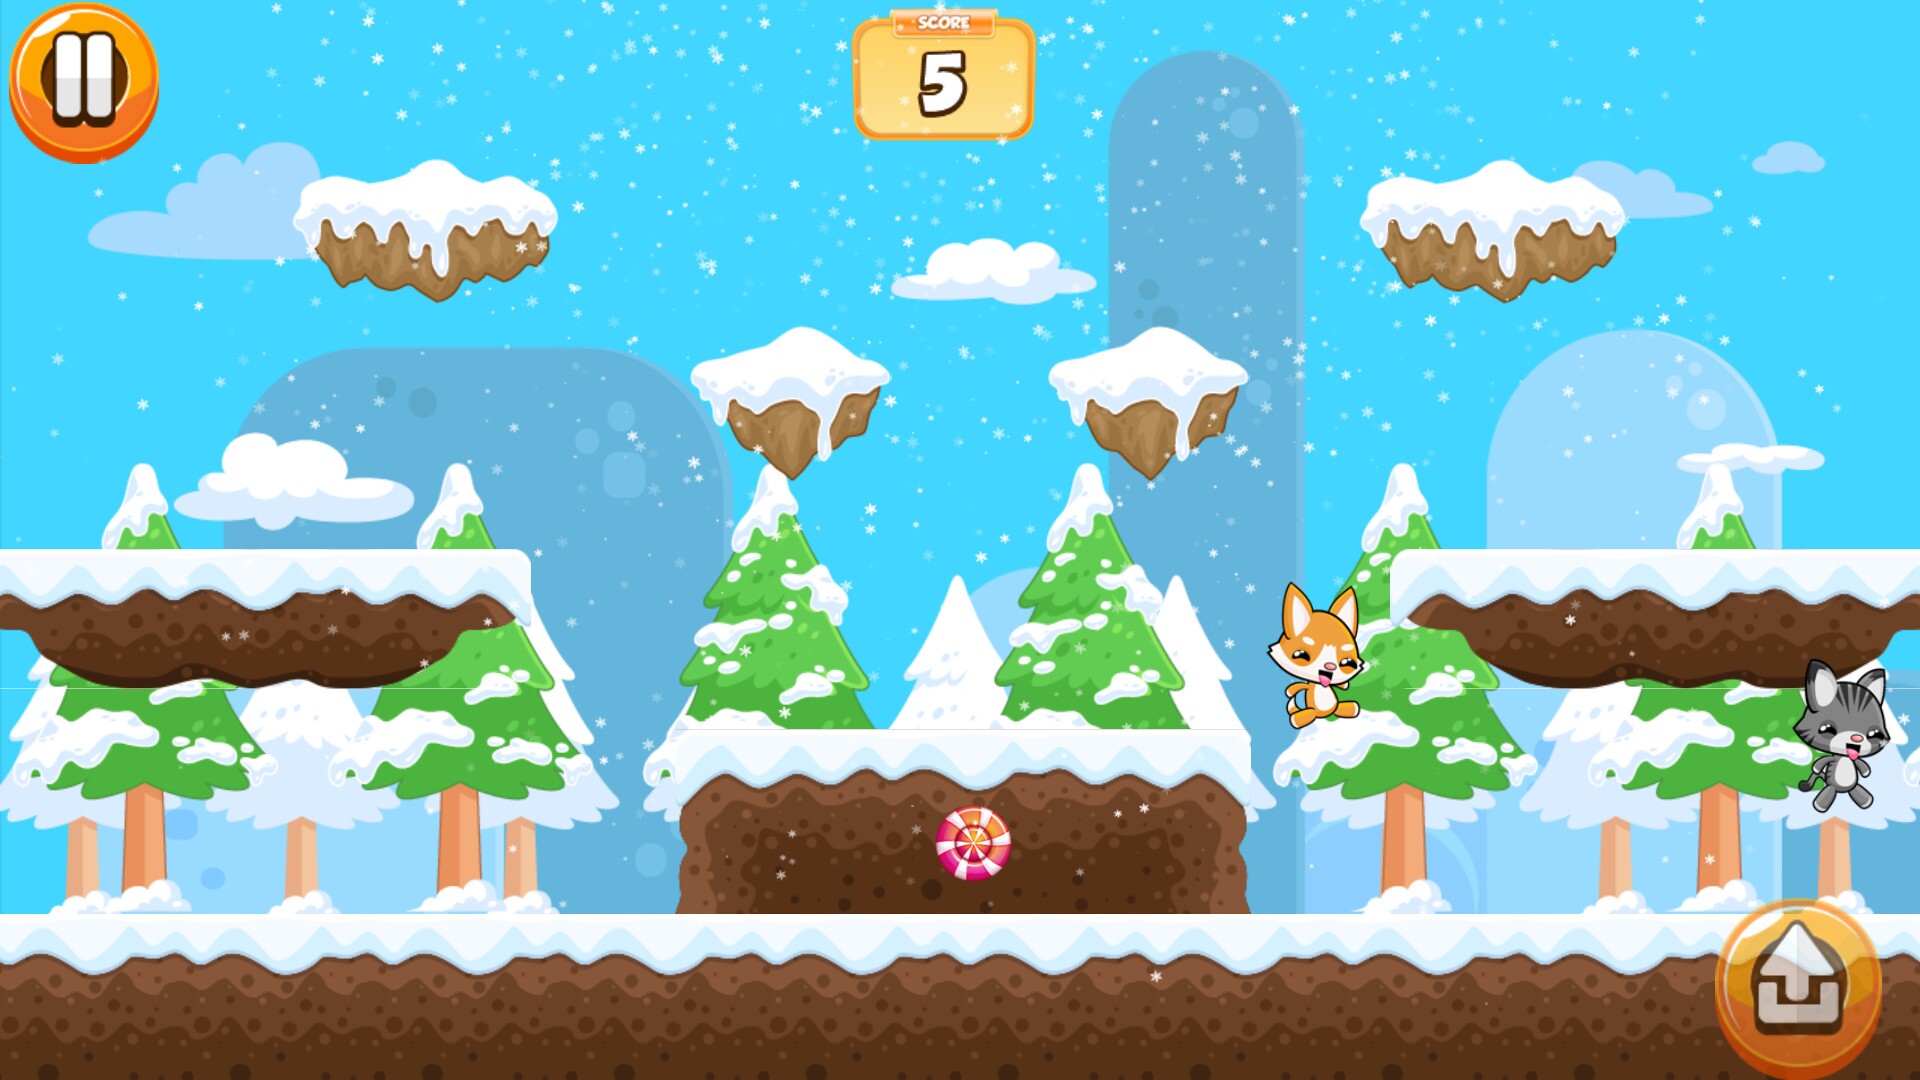 Wills to try games. Chase игра. Catch up игры. Kitty Chase игра. Игра платформе снежок.